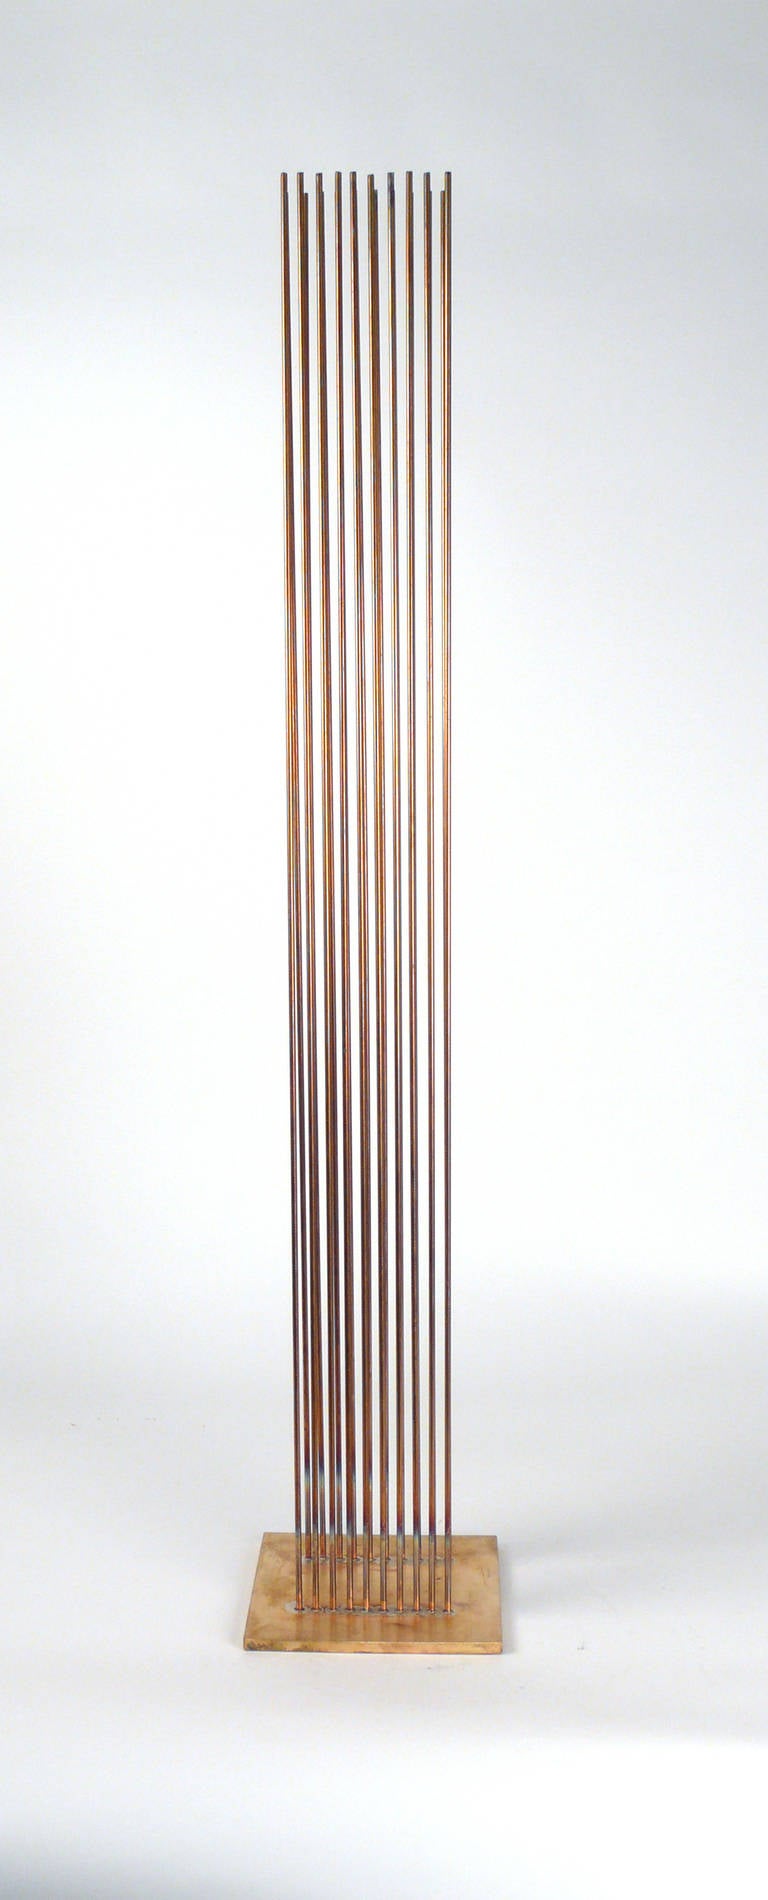 American Val Bertoia's Two Rows of Sounds